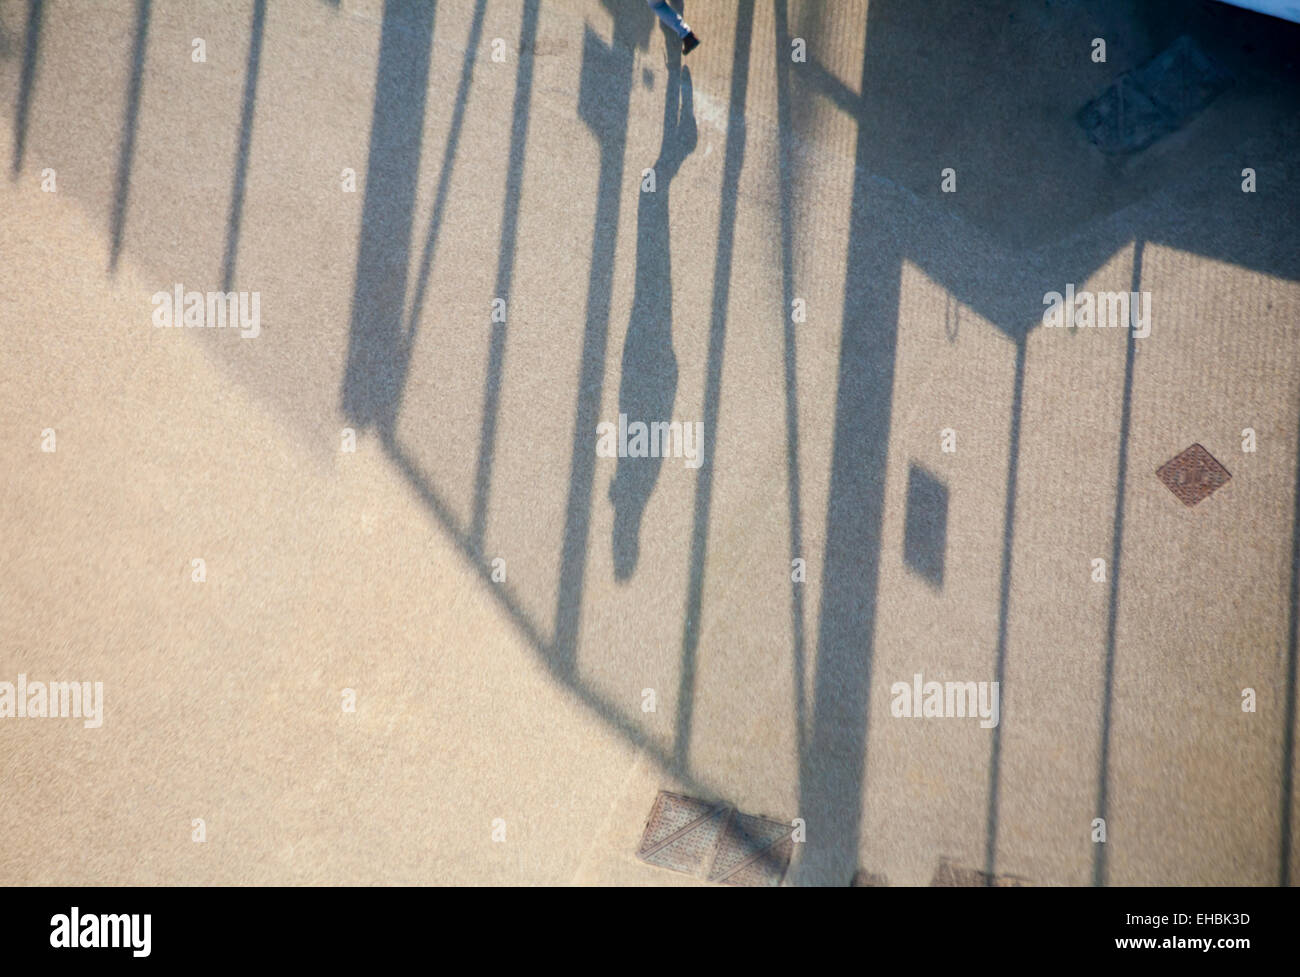 Looking down at feet with shadow of figure walking along fencing Stock Photo